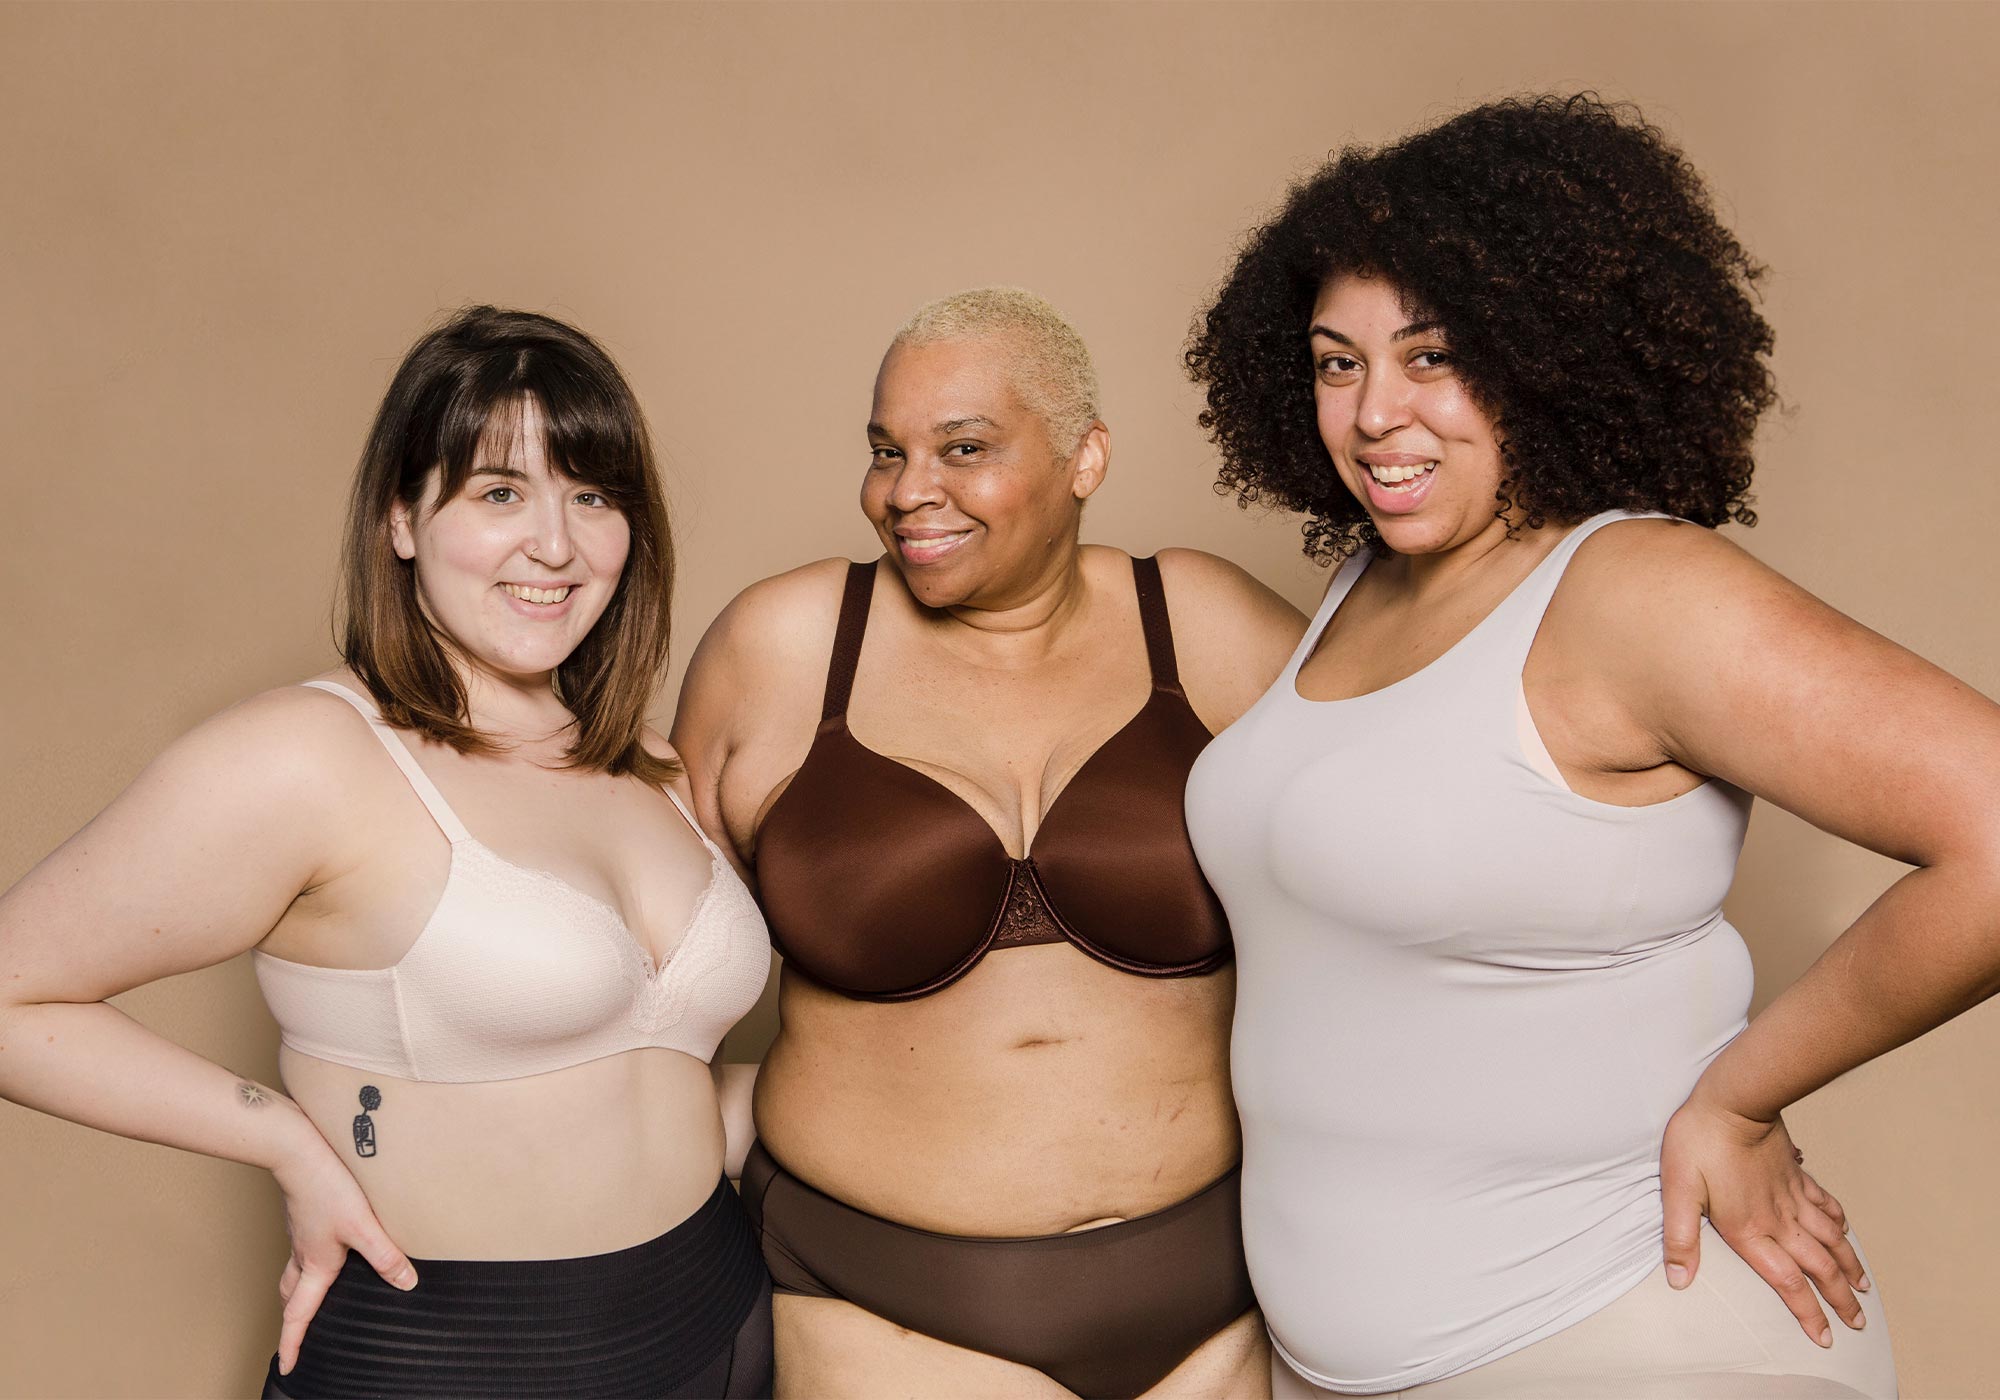 4 Questions To Ask a Bra Fitting Specialist To Get the Right Fit